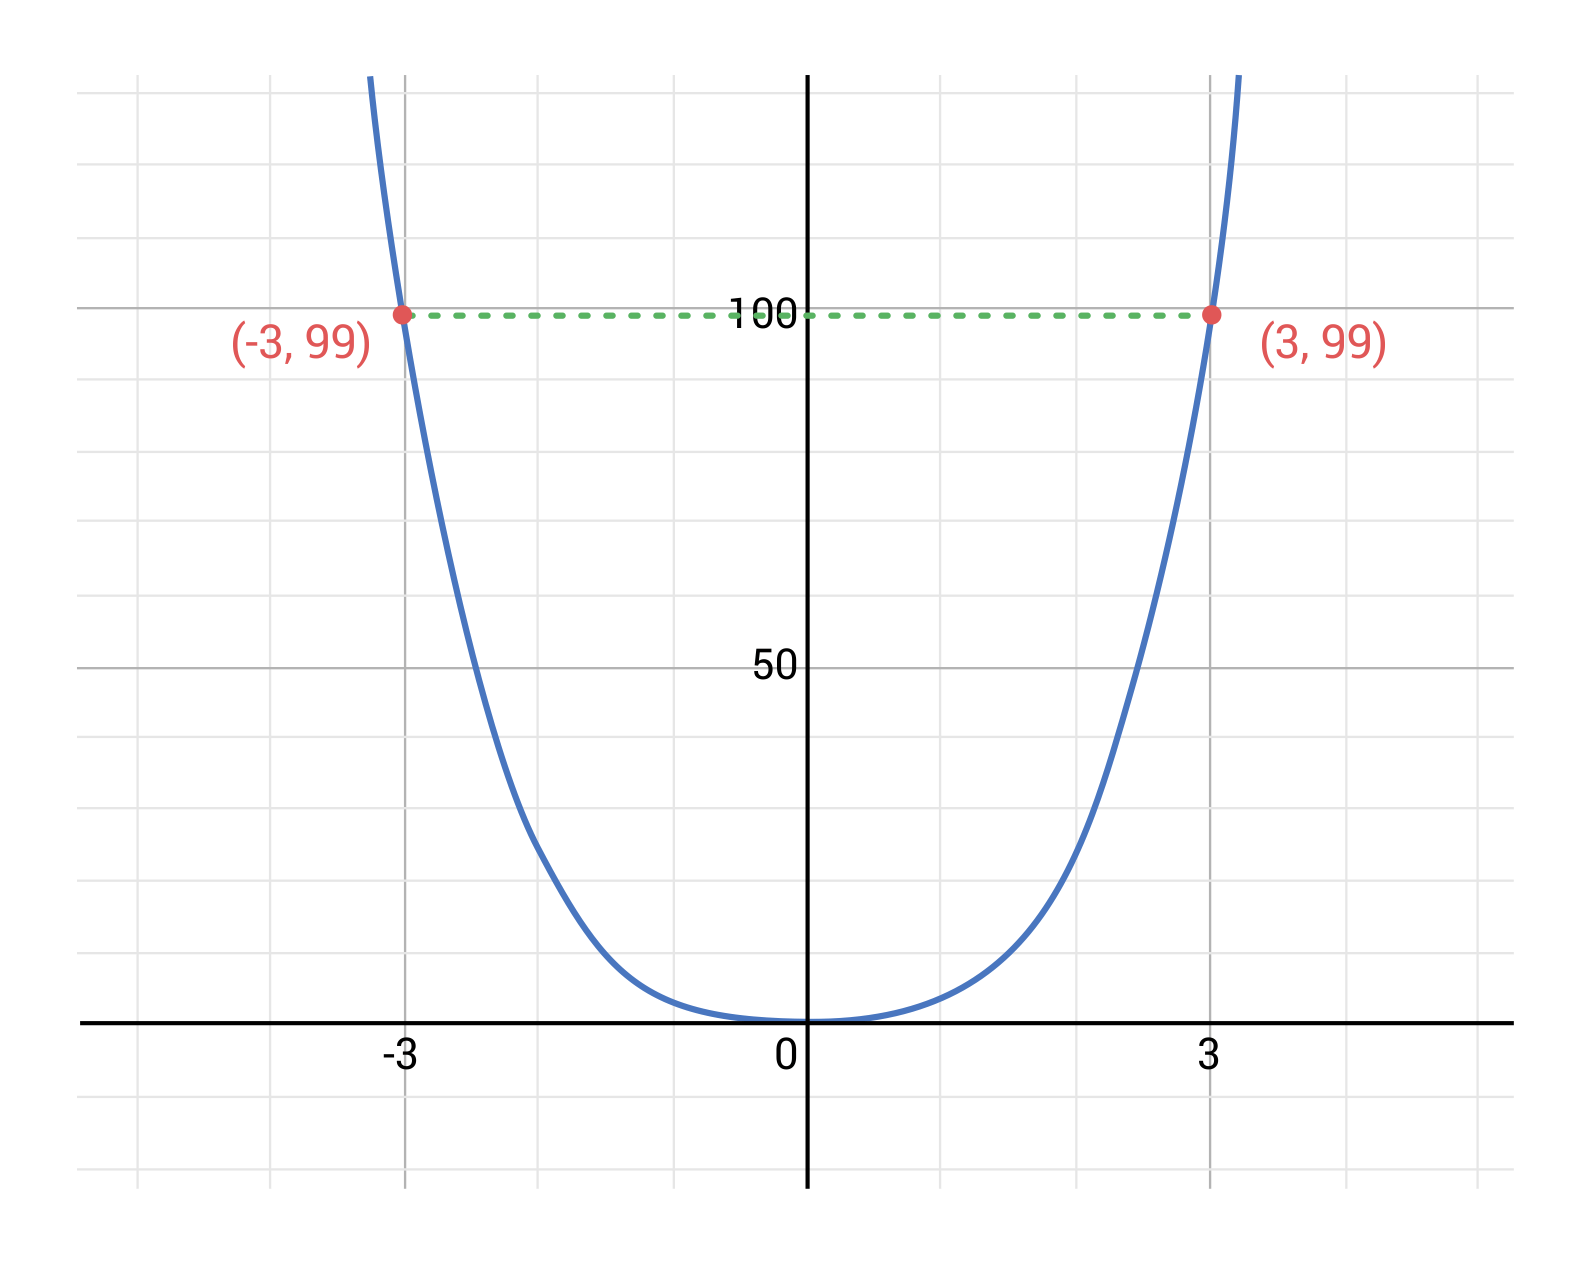 blue parabola with red points at (negative 3, 99) and (3, 99), green dashed line between these two points